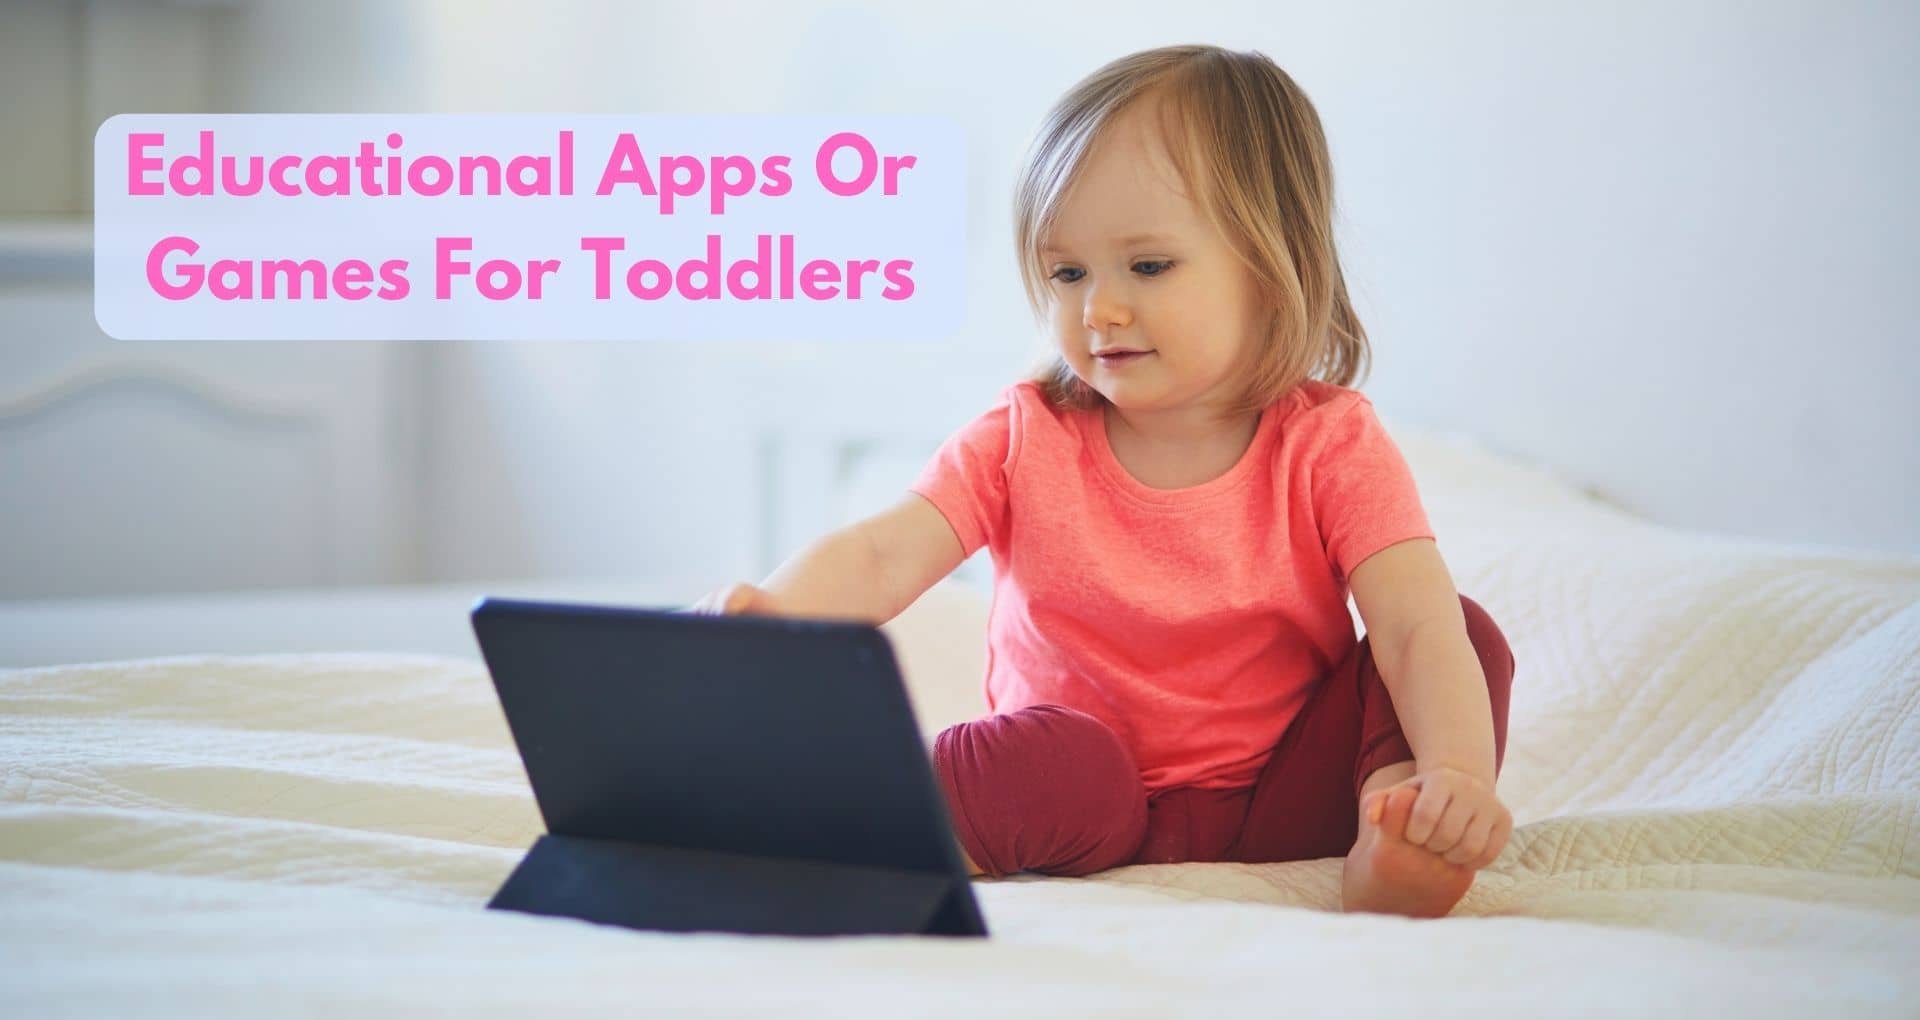 What Are Some Educational Apps Or Games For Toddlers?